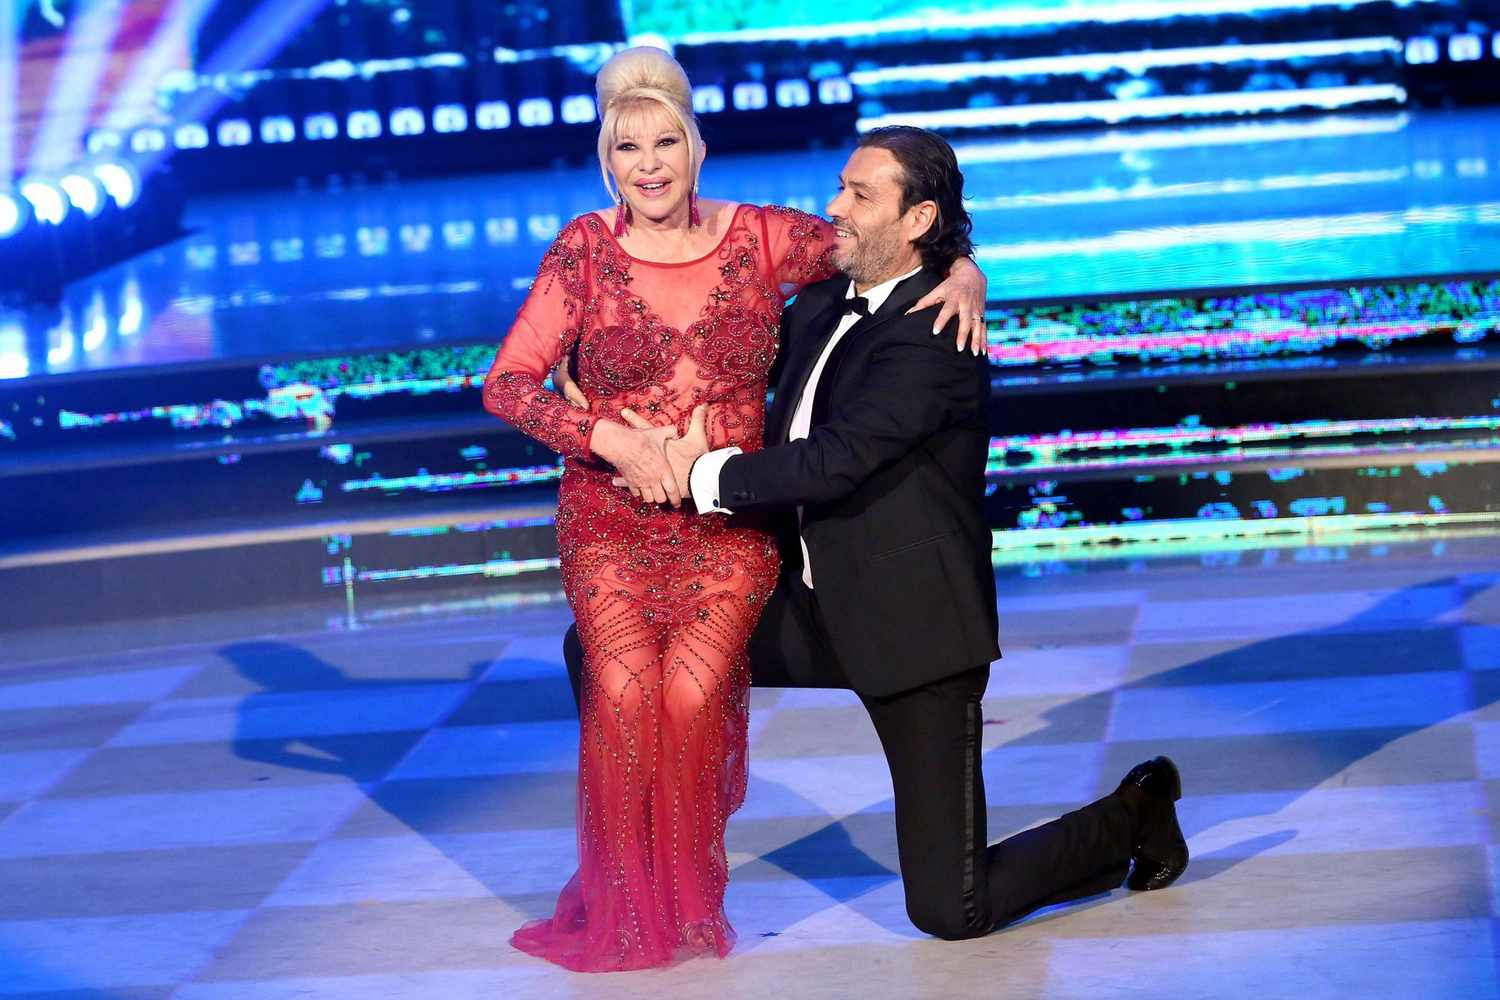 Ivana Trump on Dancing with the Stars